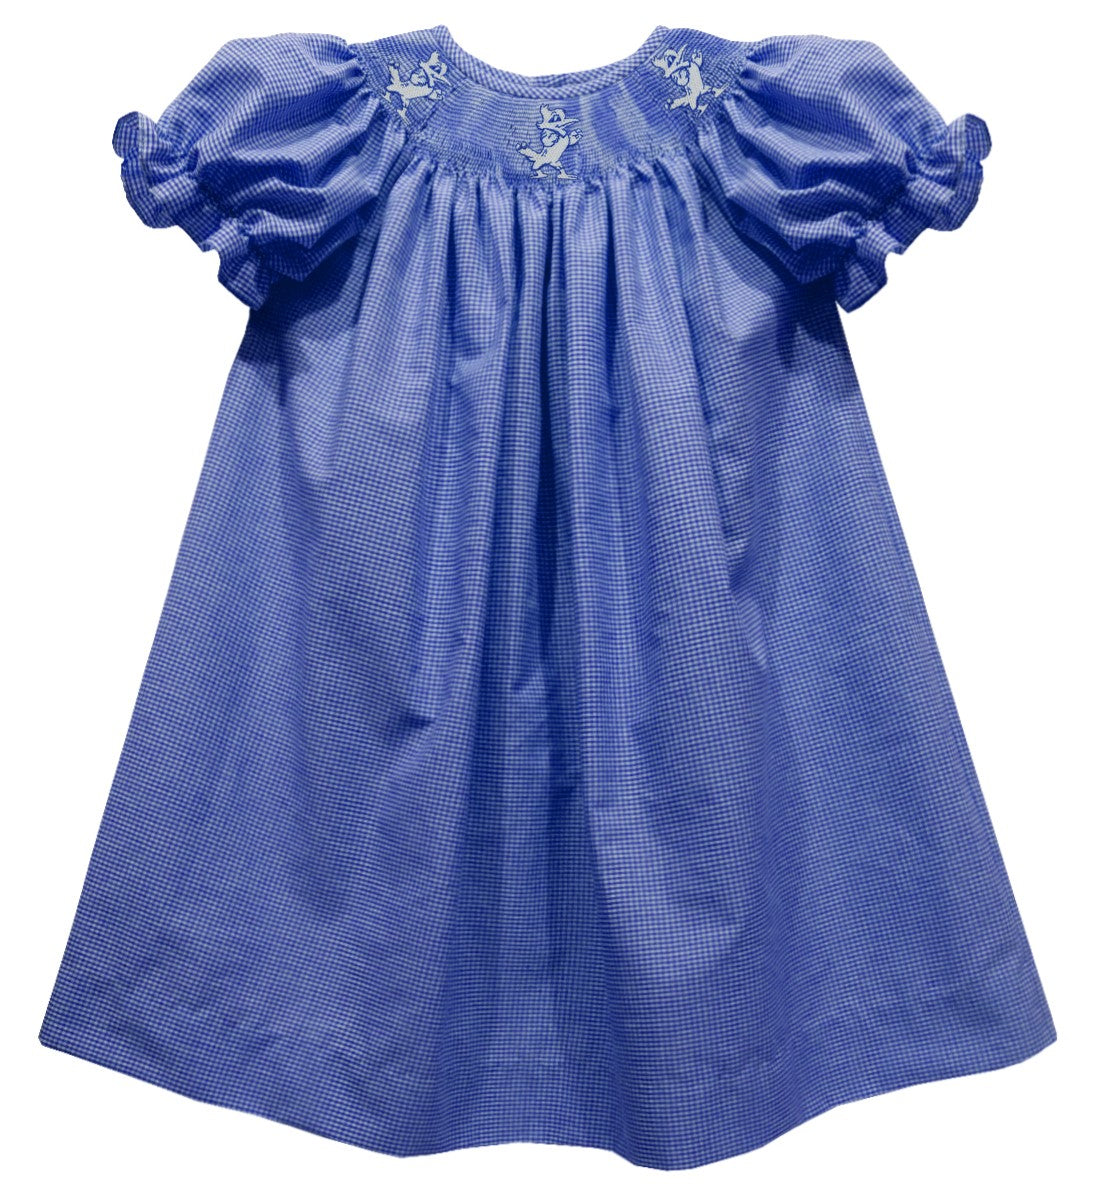 Vive La Fete.  55% Polyester/45% Cotton.  Machine Wash.  Smocked Jayson Logo.  This girl's classic bishop style dress will show off her Blue Jay Spirit!   